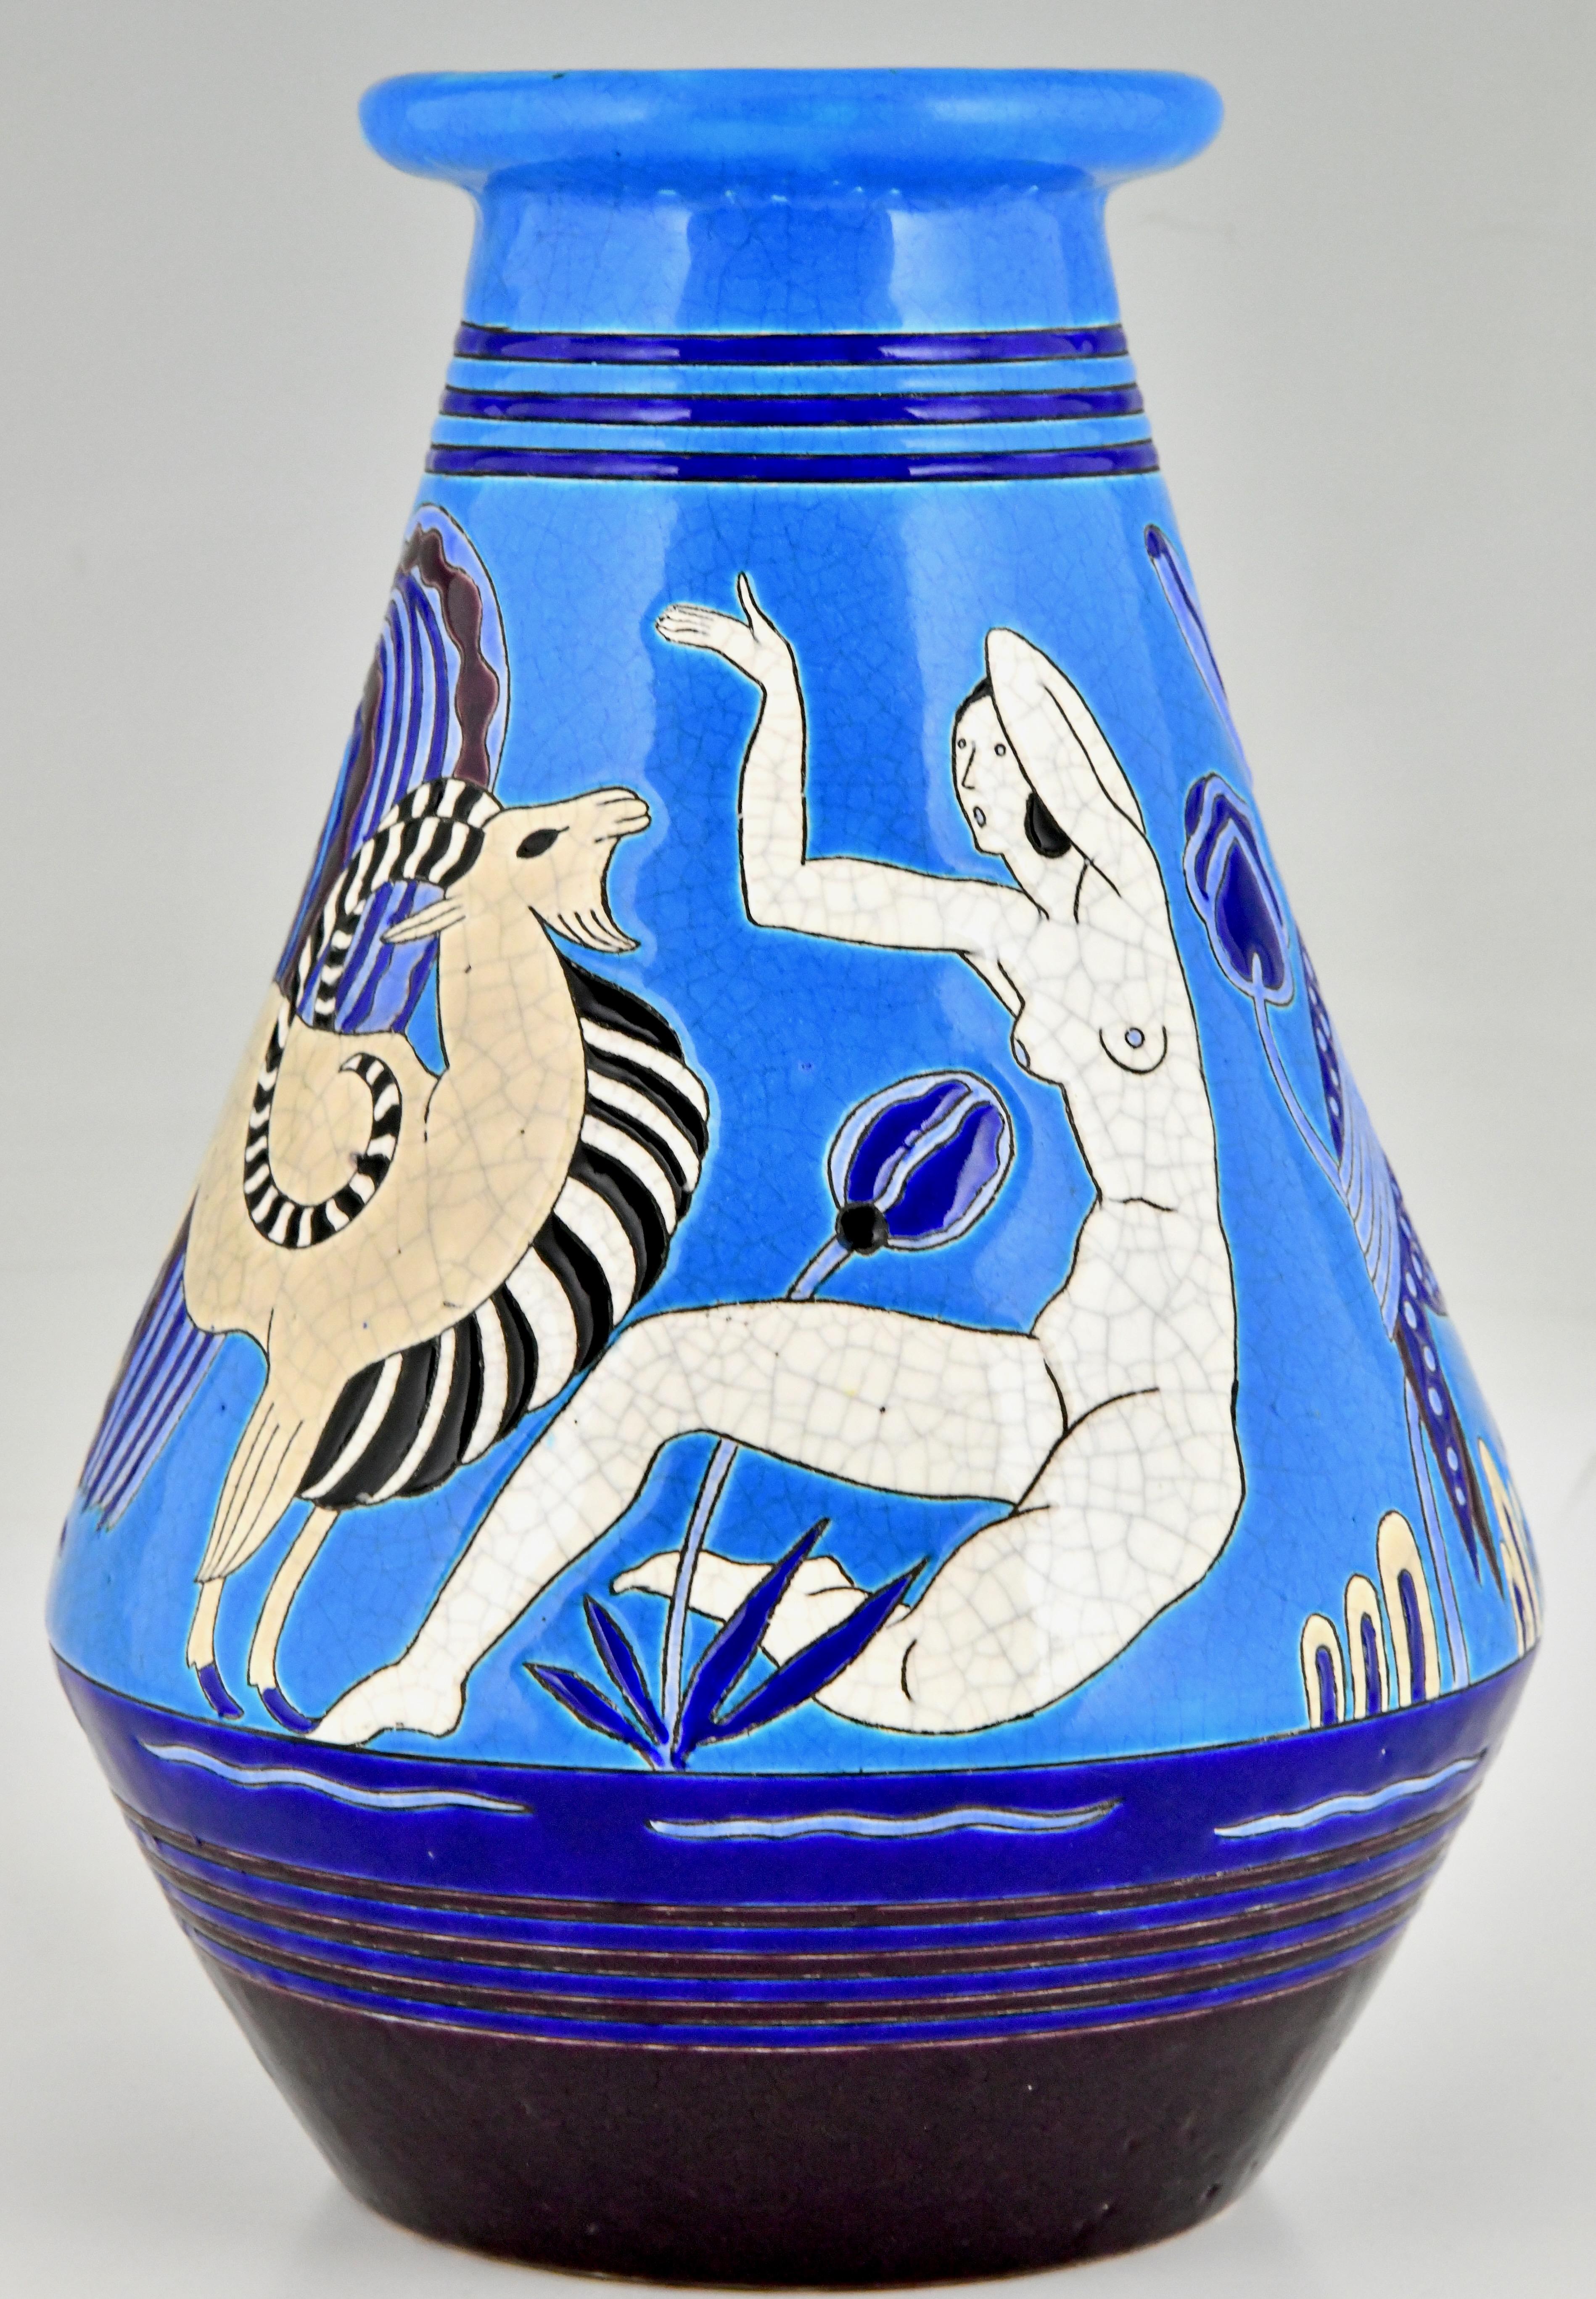 Art Deco Ceramic Vase with Bathing Nudes by Primavera  Longwy 1925  France In Good Condition For Sale In Antwerp, BE